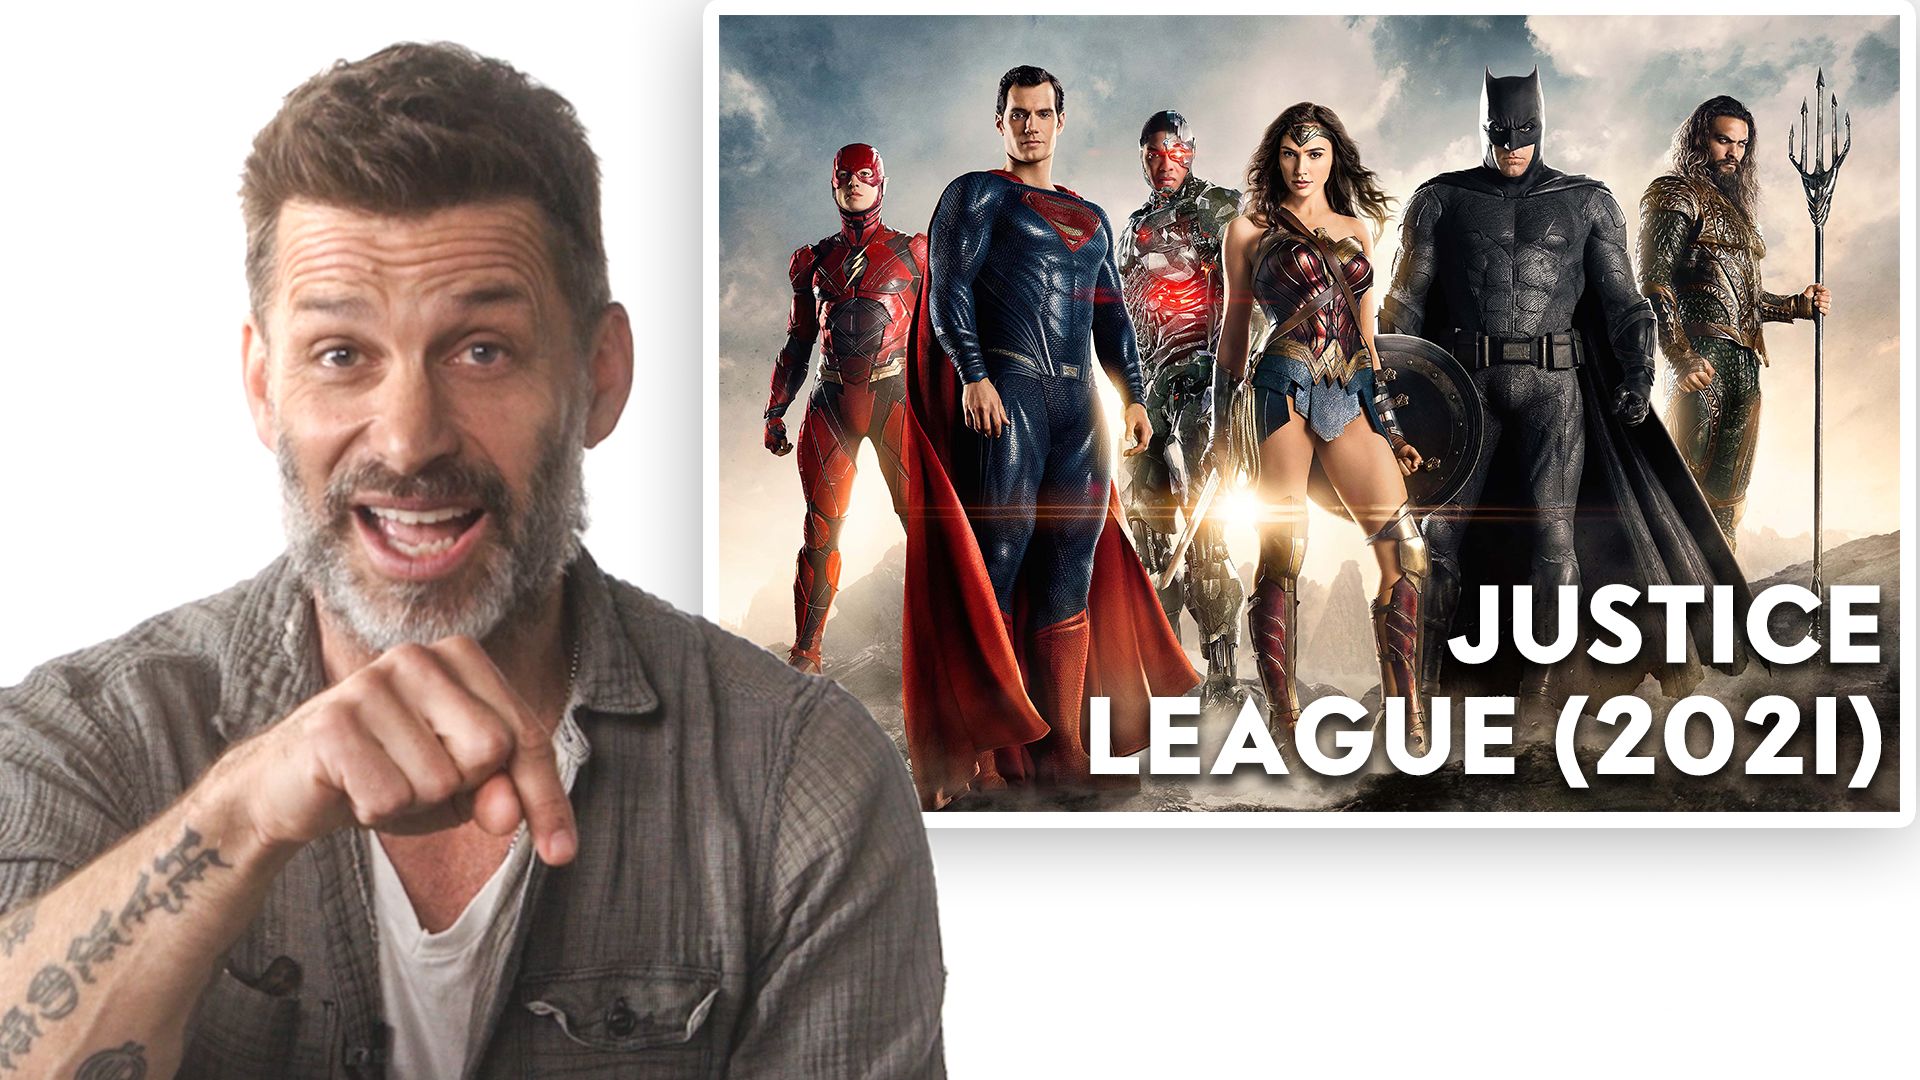 Watch: Zack Snyder releases clip of 'Justice League' showing